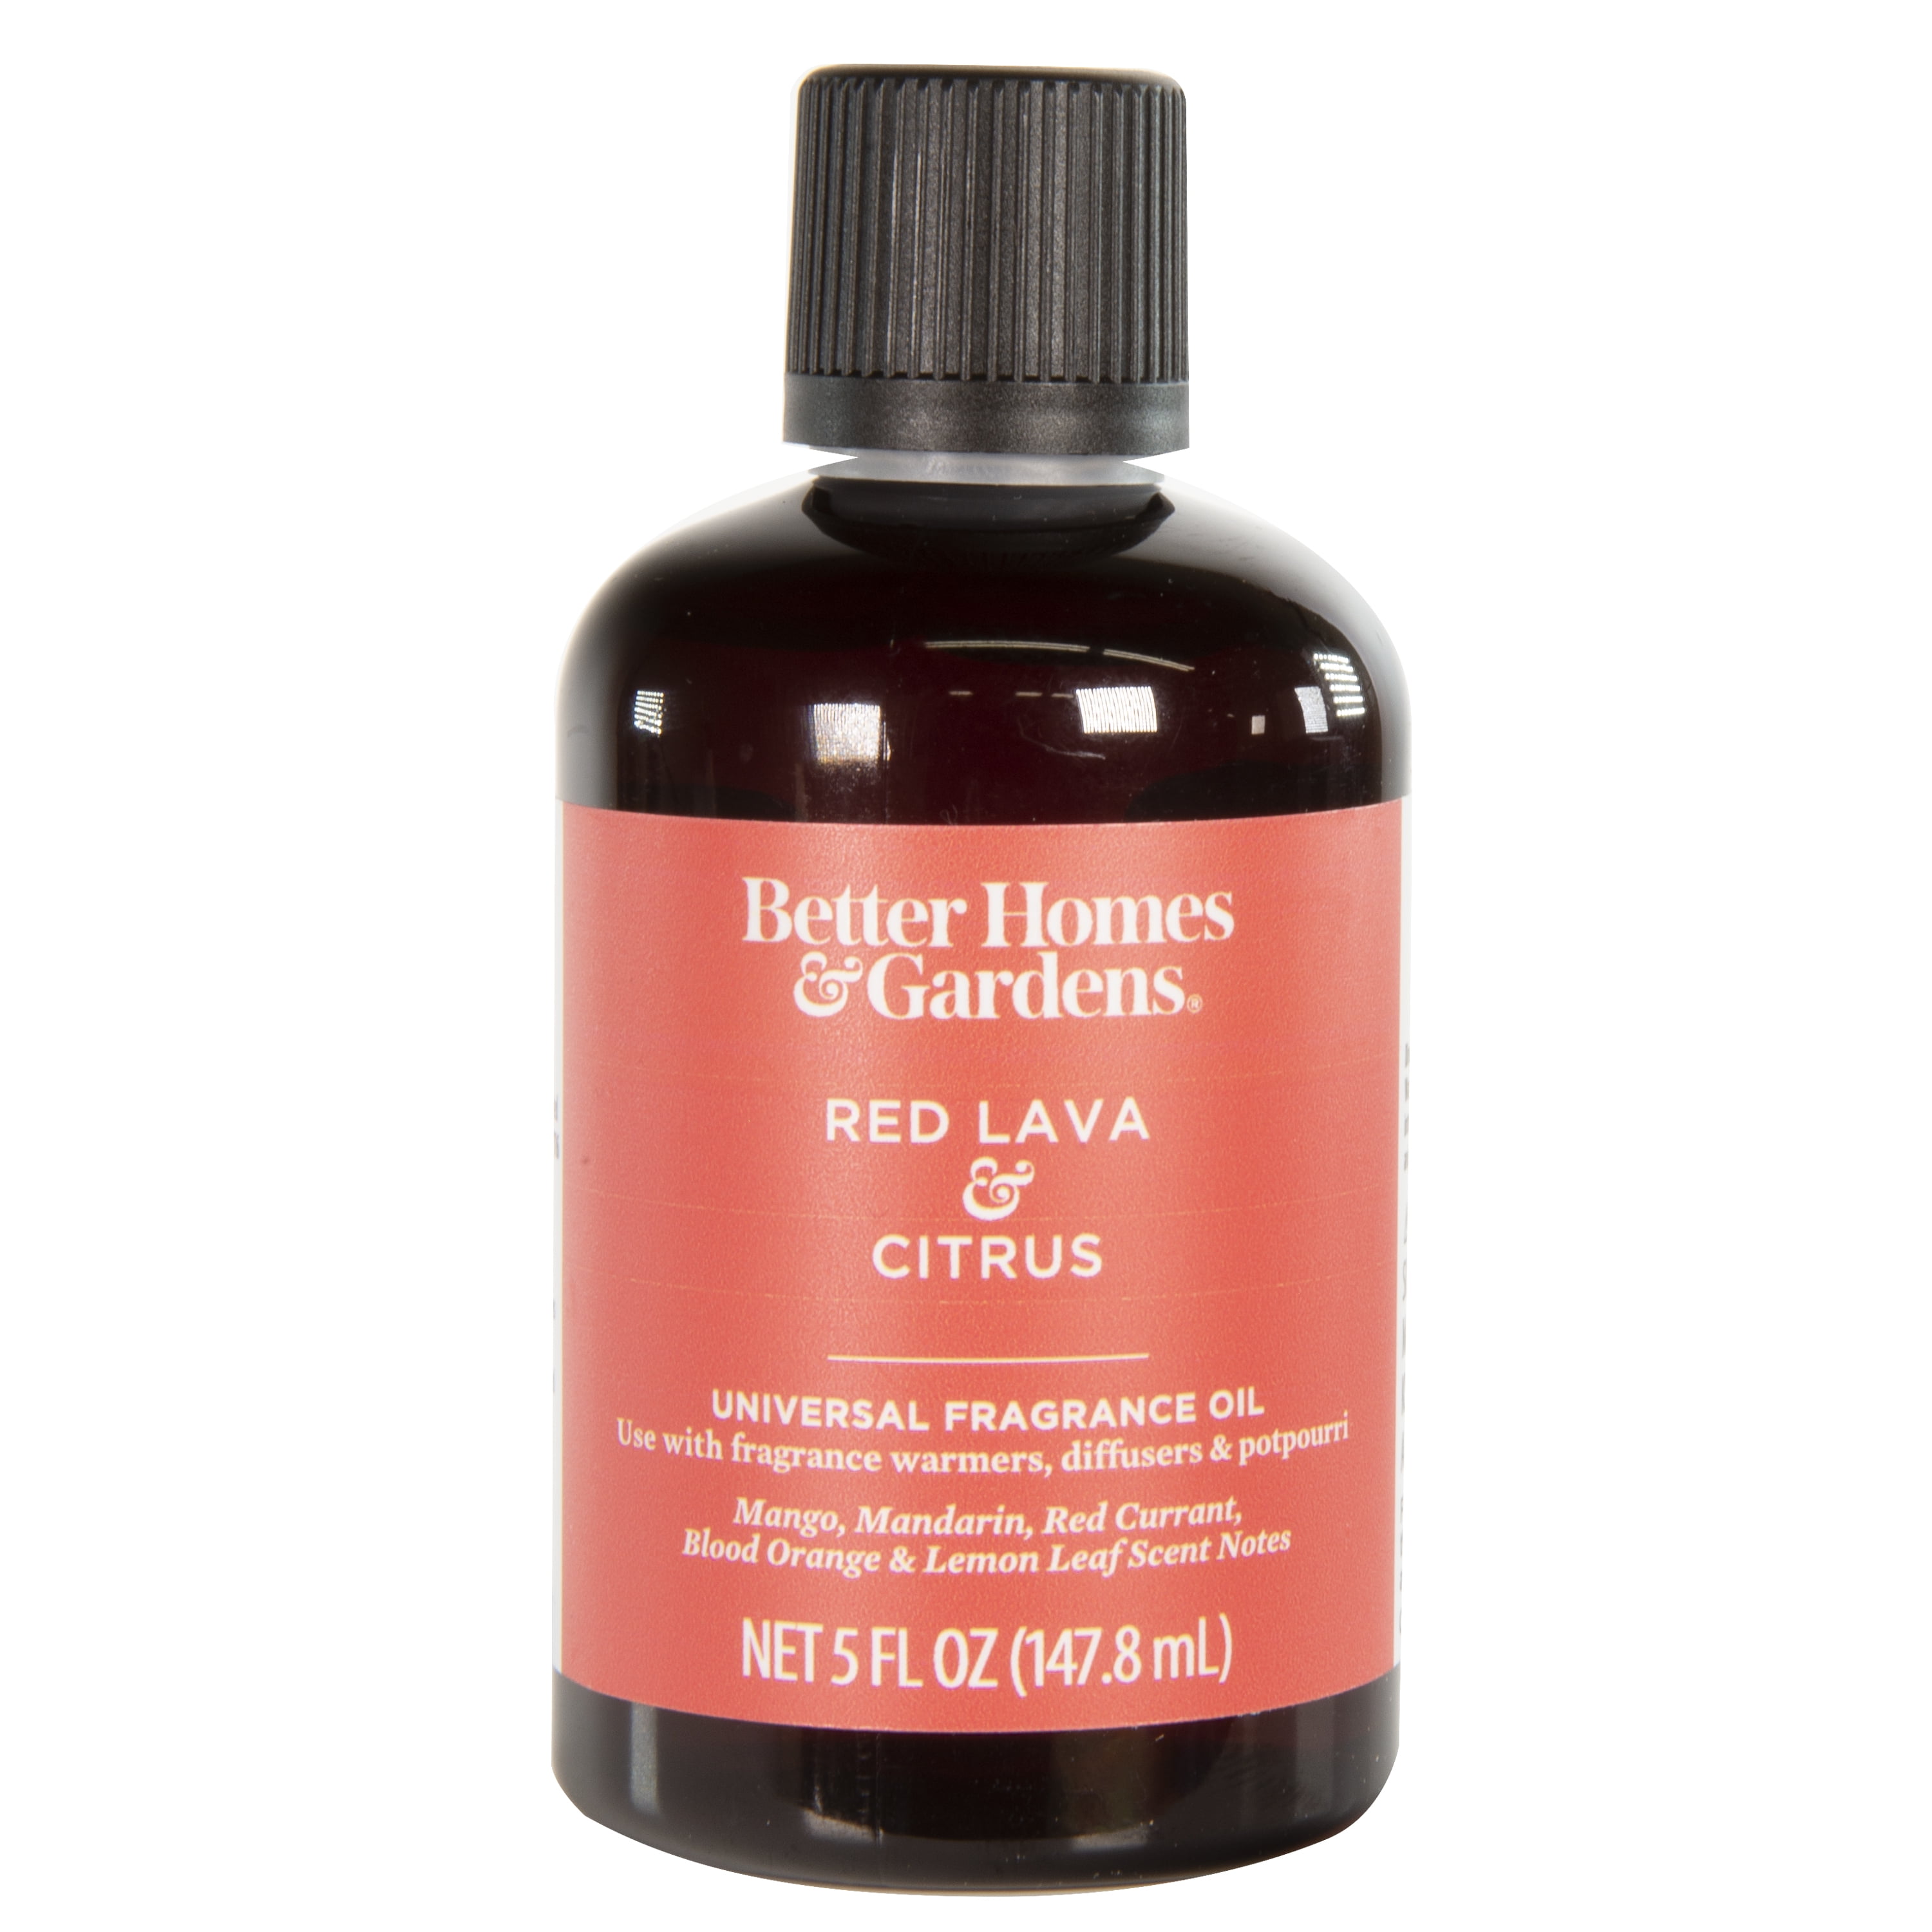 Better Homes & Gardens Universal Fragrance Oil, Red Lava & Citrus, 5 fl oz, for use with Fragrance Oil Diffusers, Fragrance Warmers, Potpourri, and Wicking Fragrance Diffusers